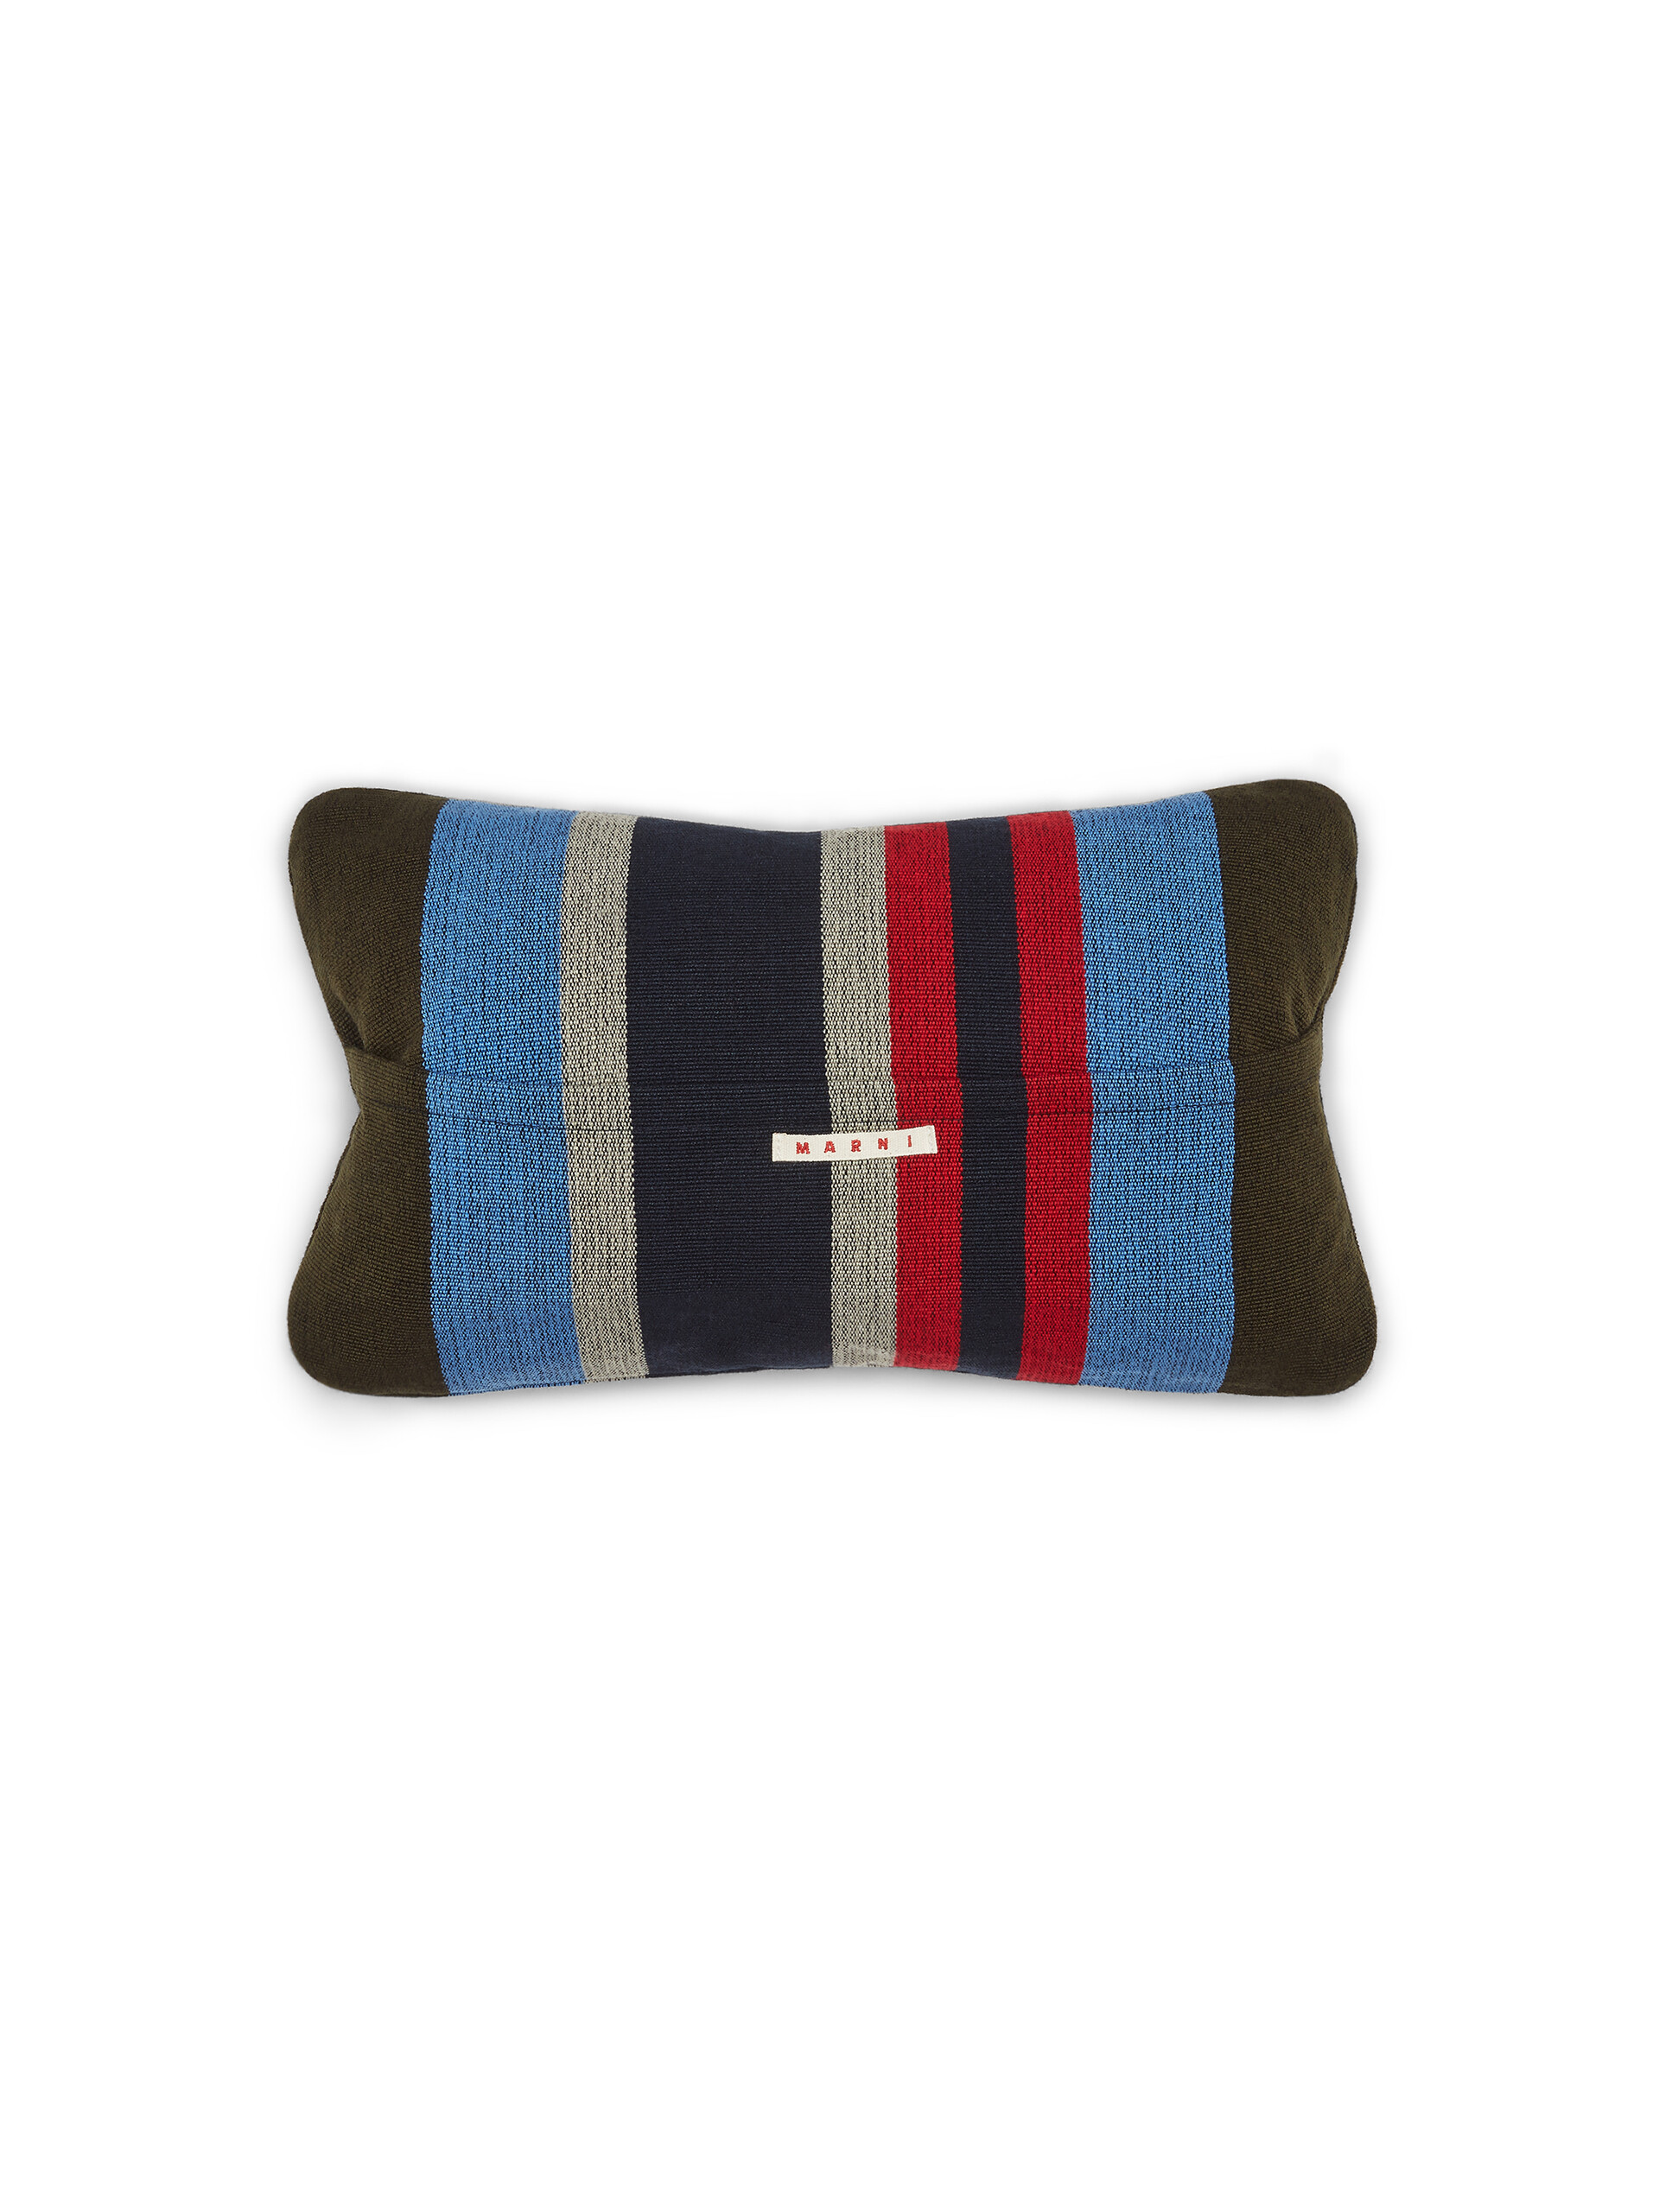 MARNI MARKET rectangular pillow cover in polyester with green pale blue and blue vertical stripes - Furniture - Image 2